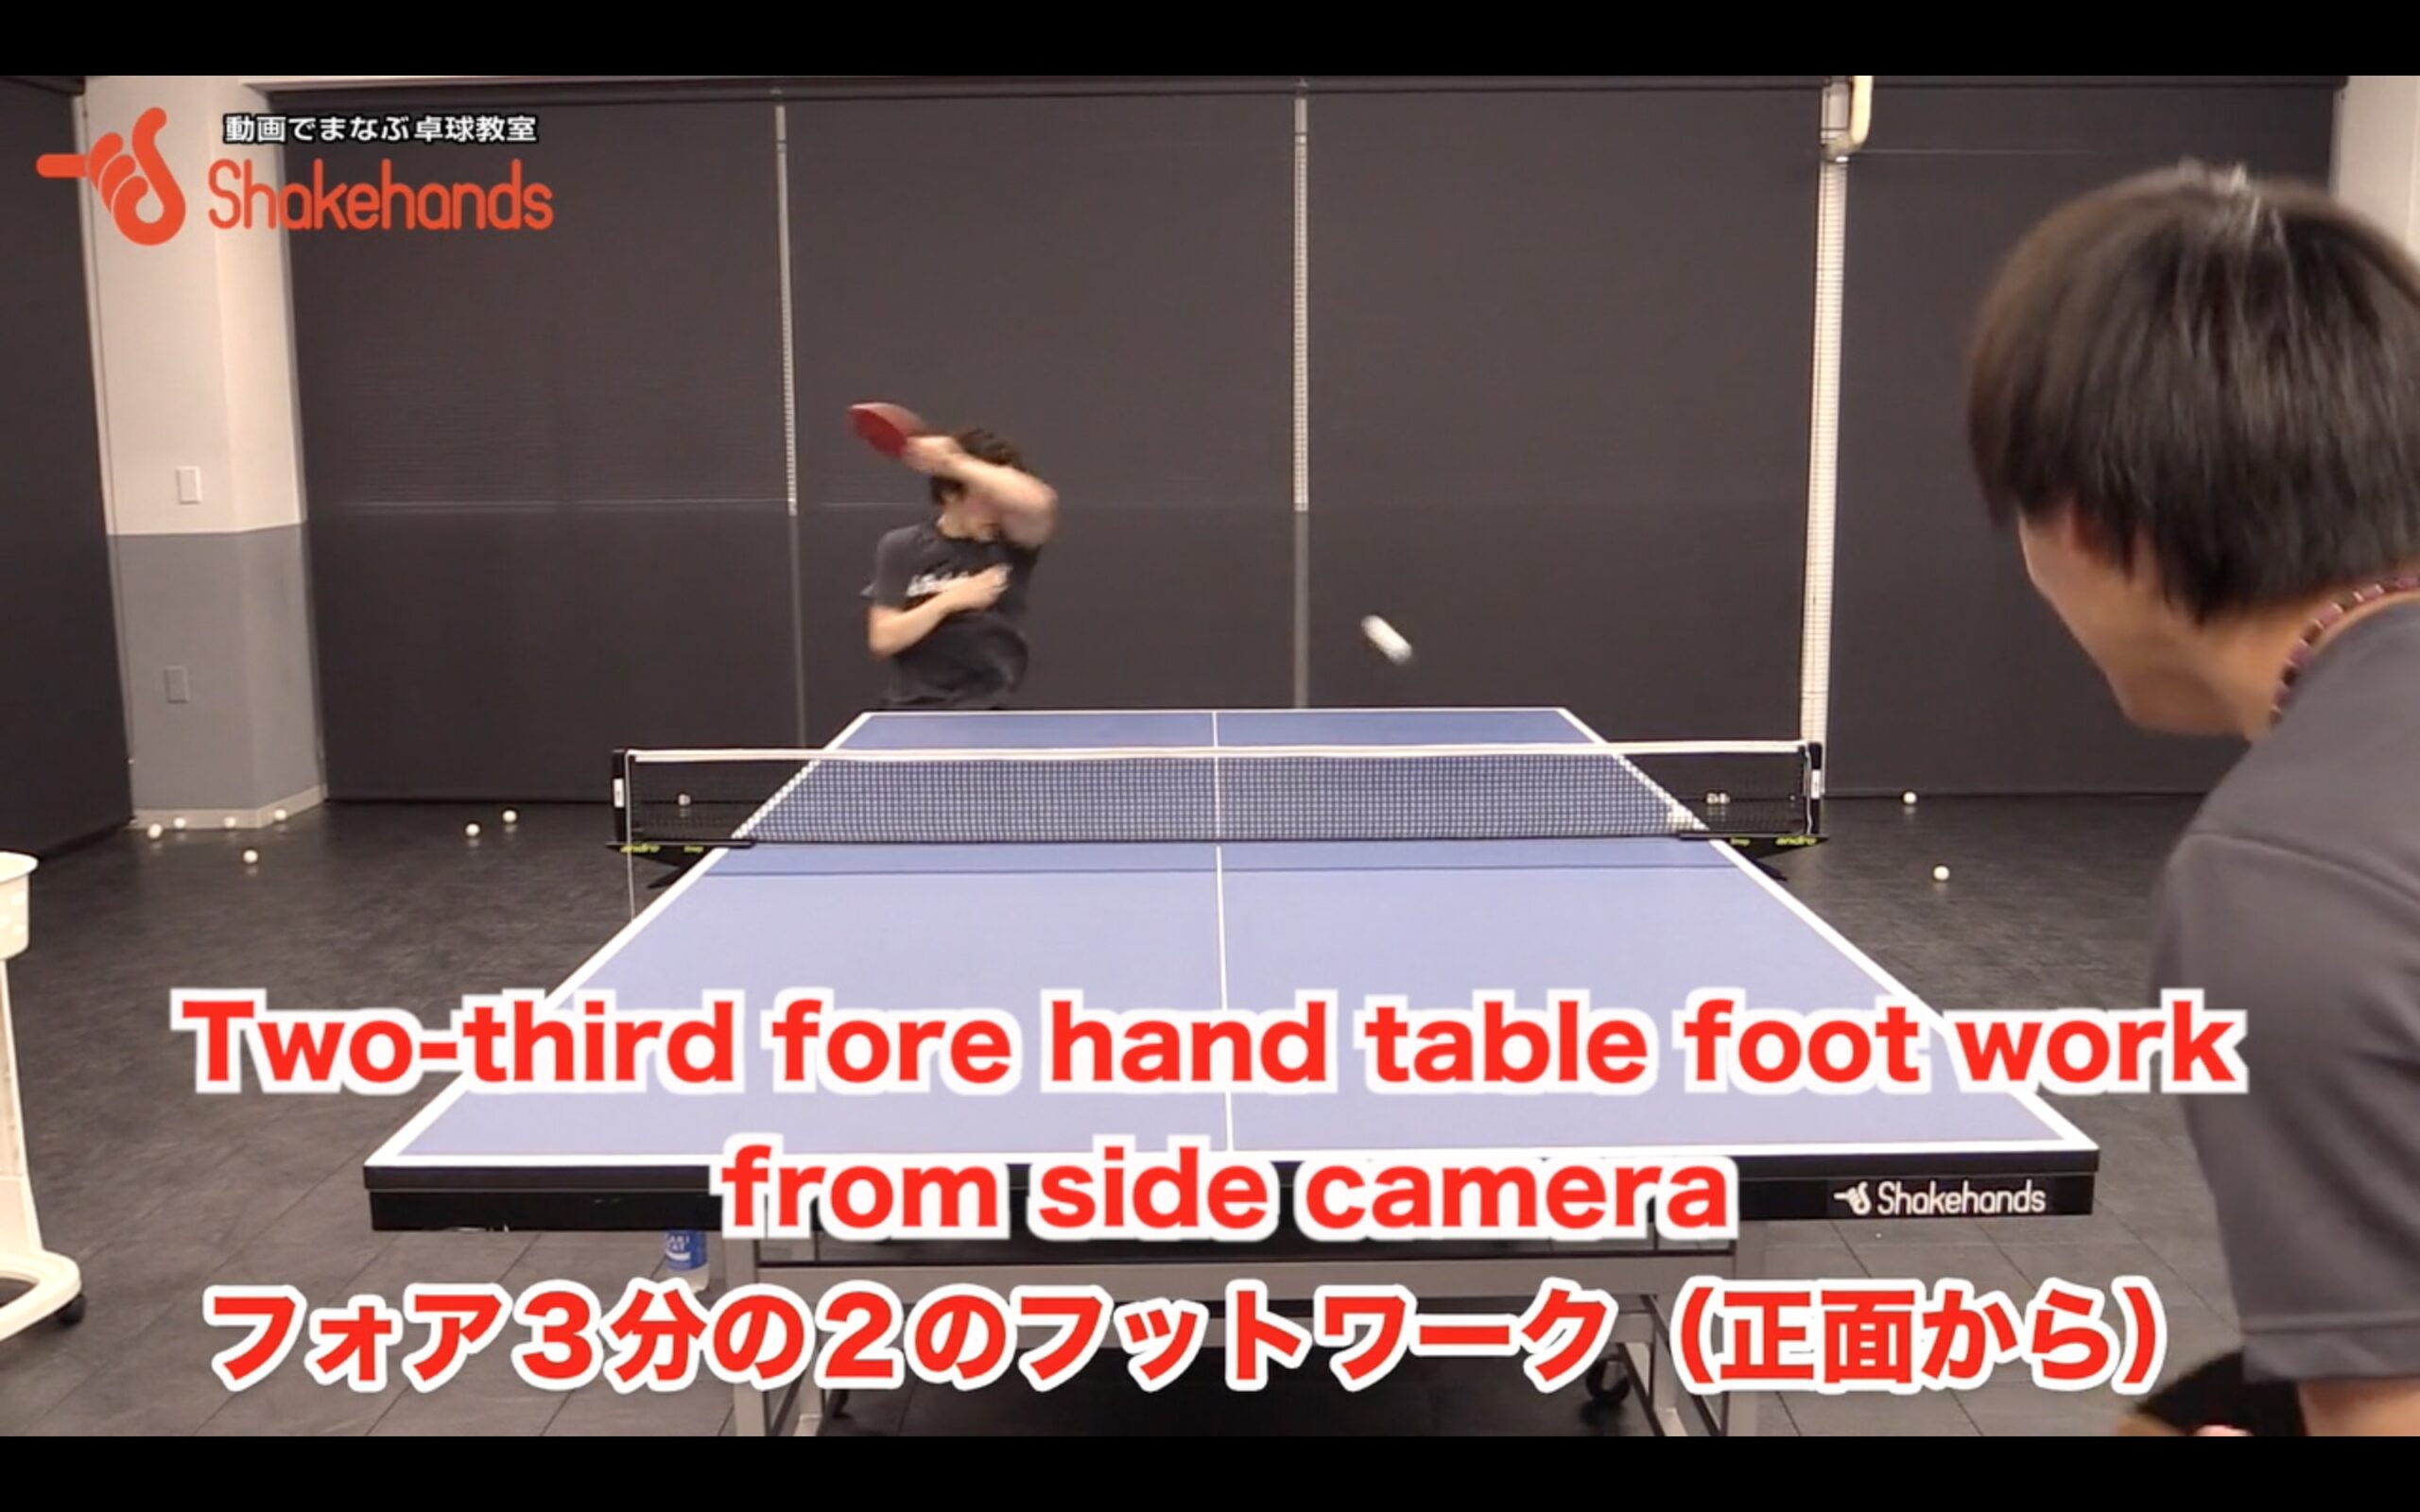 two-third forehand foot work